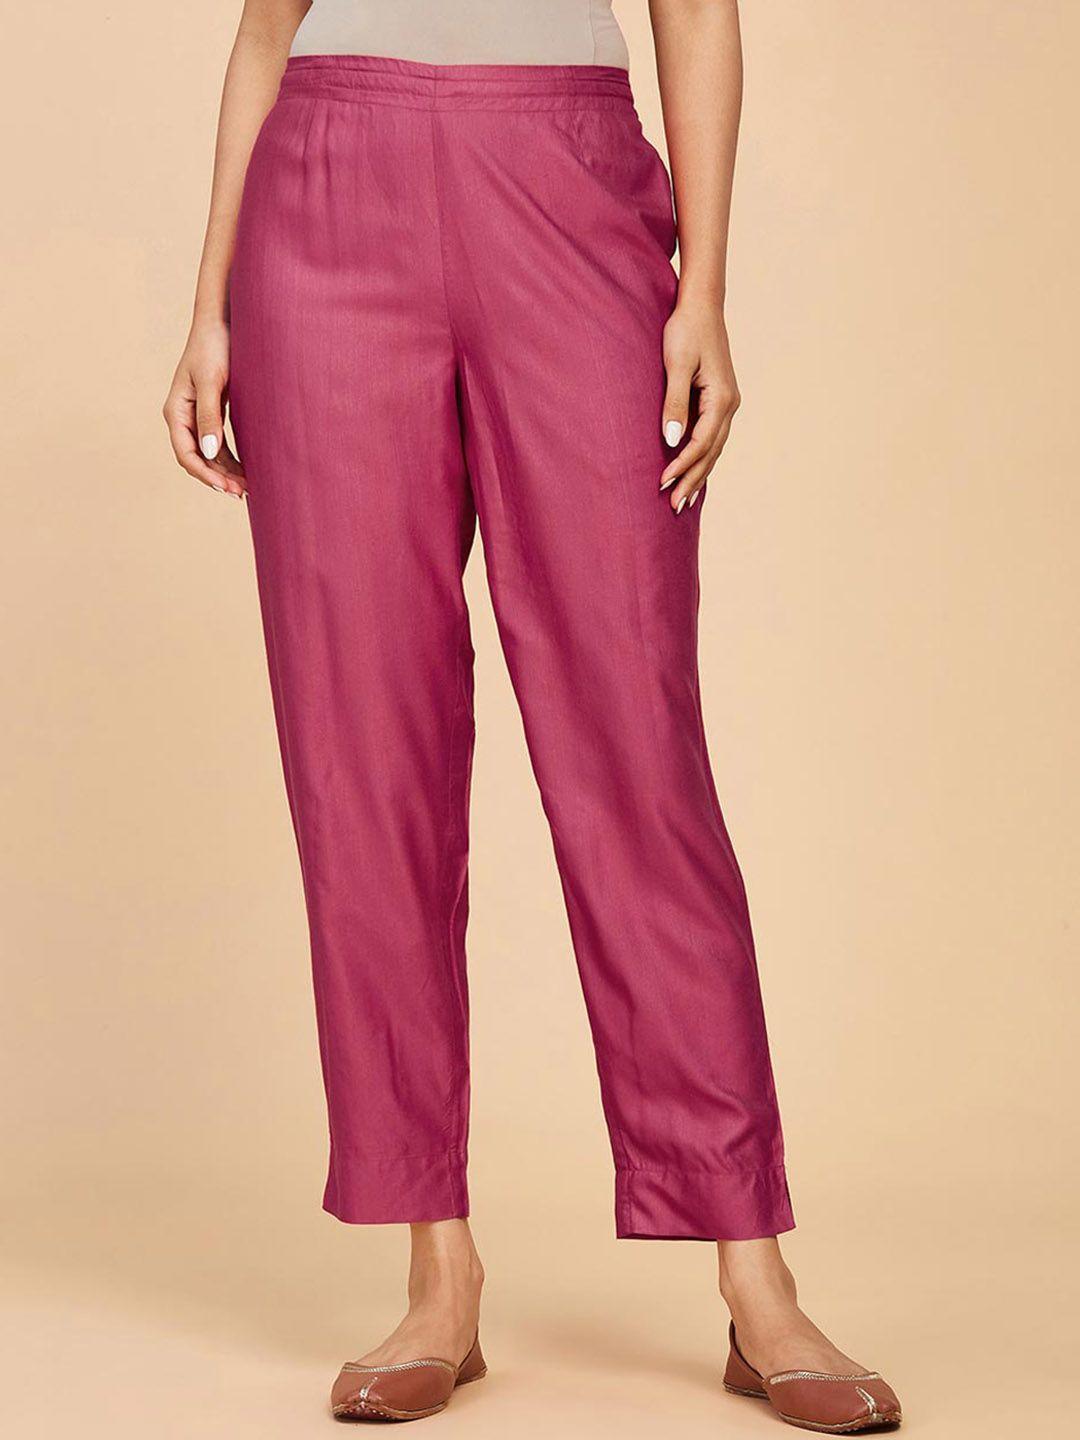 fabindia-women-mid-rise-plain-knitted-cropped-trousers